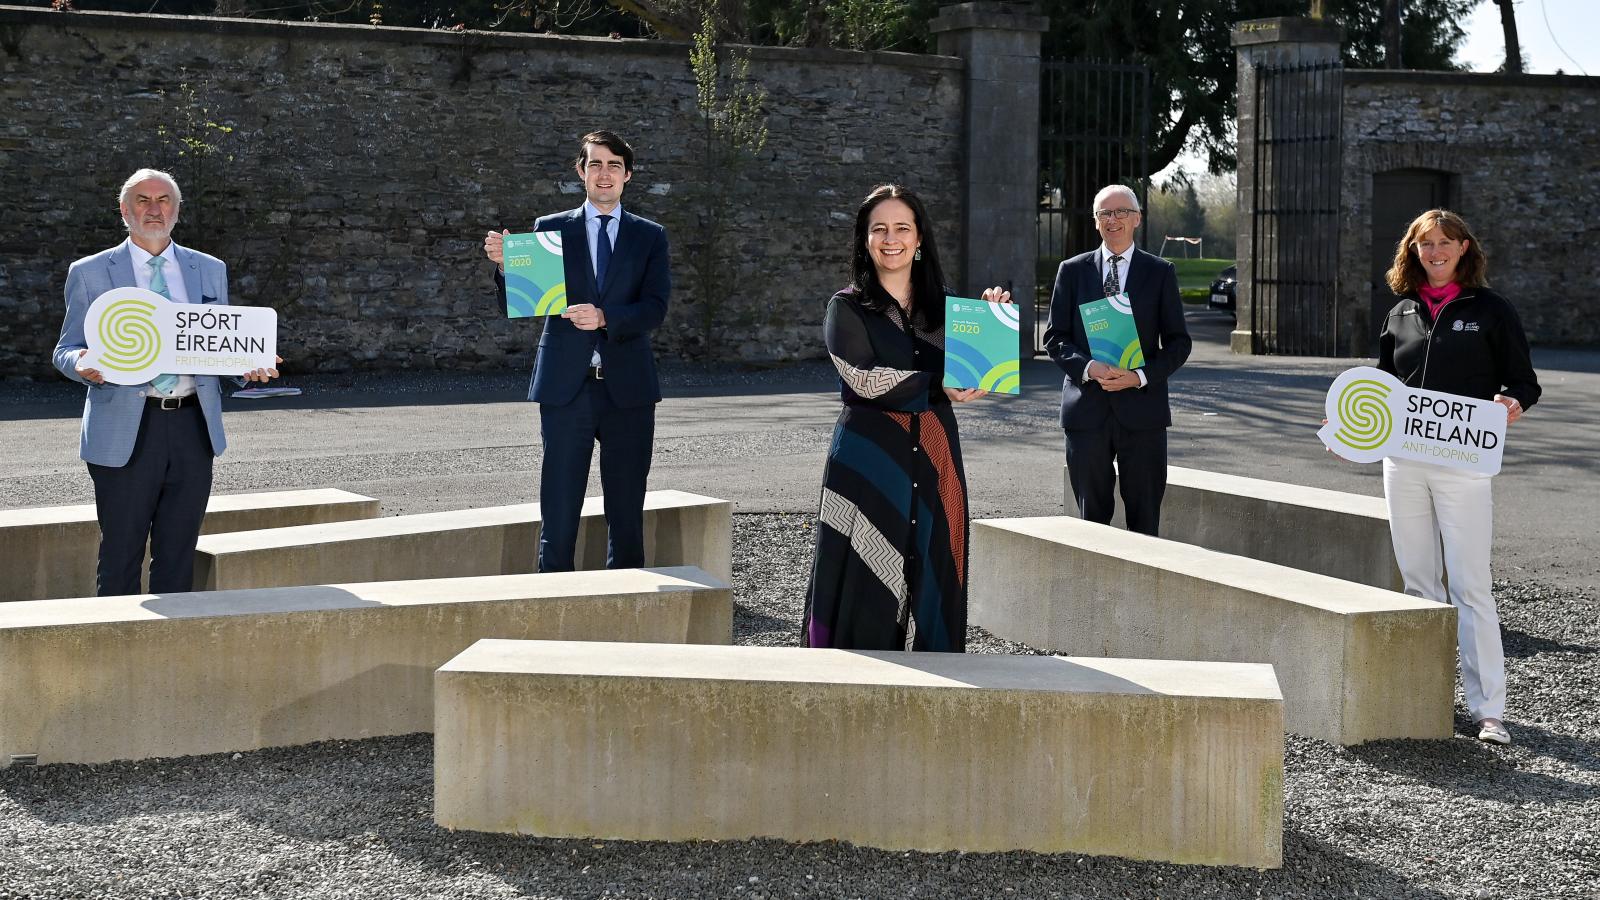 5 people standing holding a copy of the Anti Doping Review. From left to right - Kieran Mulvey, Minister Jack Chambers, Minister Catherine Martin, John Treacy, Dr. Una May